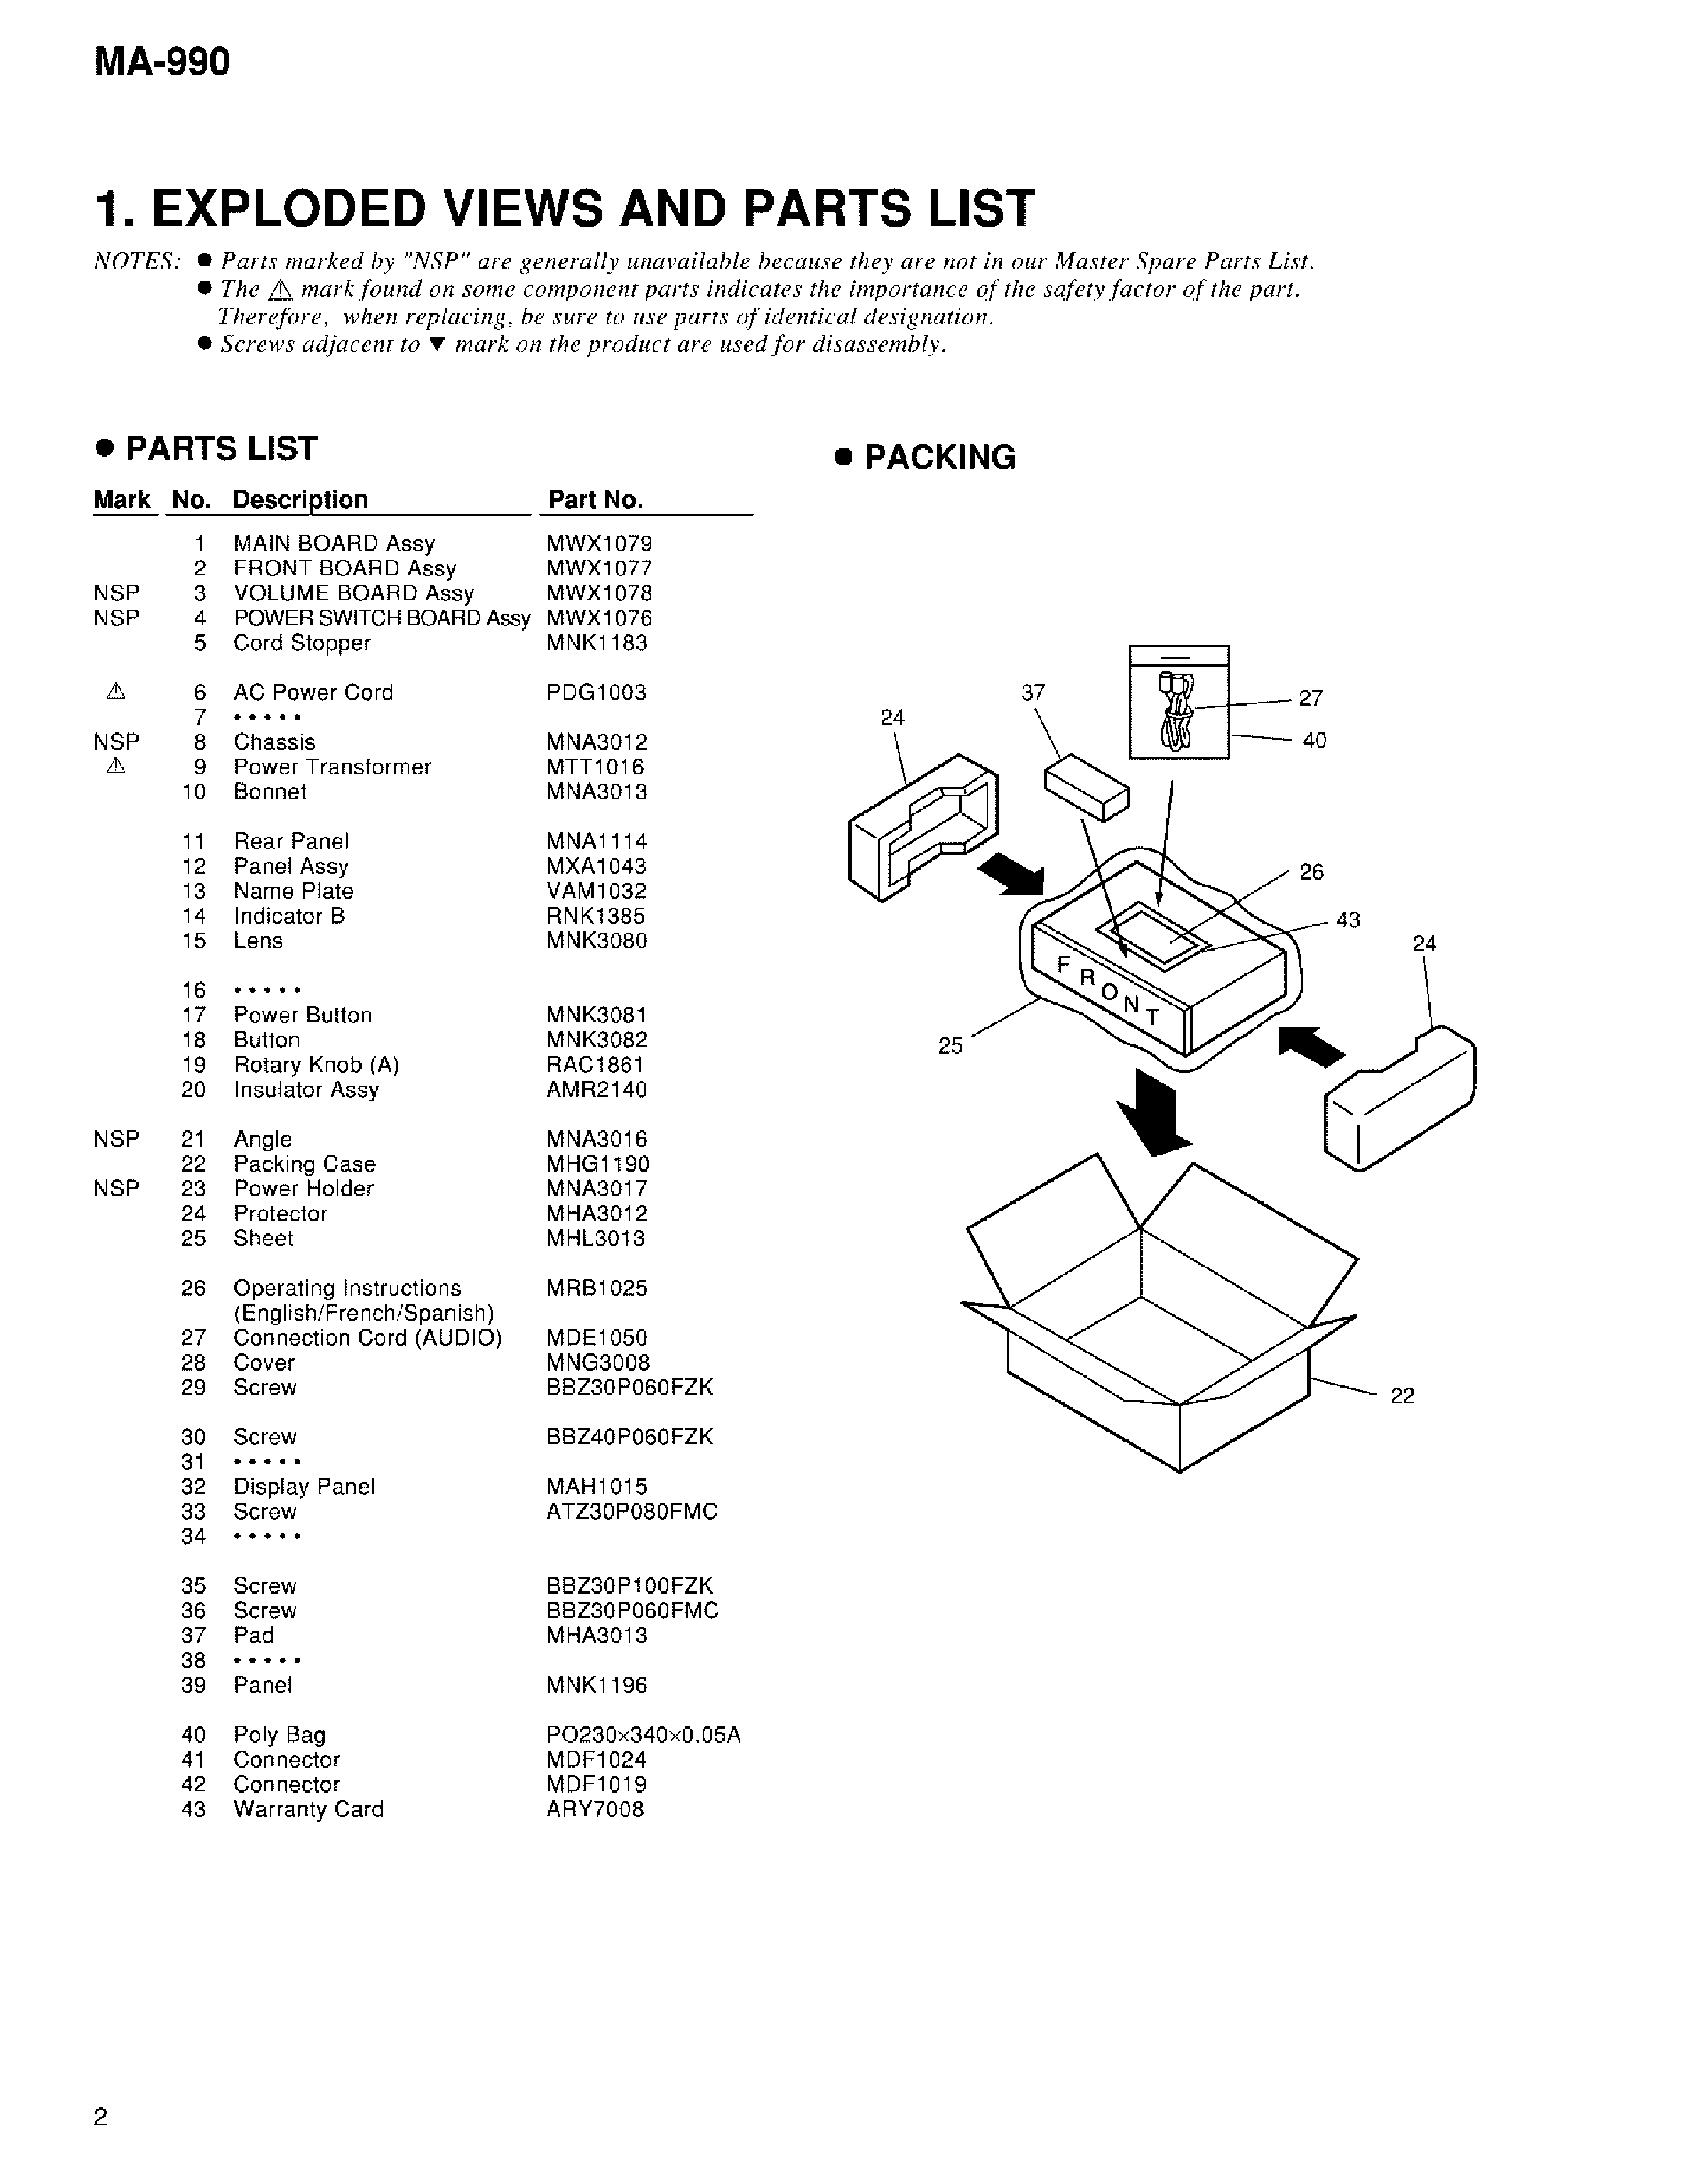 PIONEER MA990 service manual (2nd page)